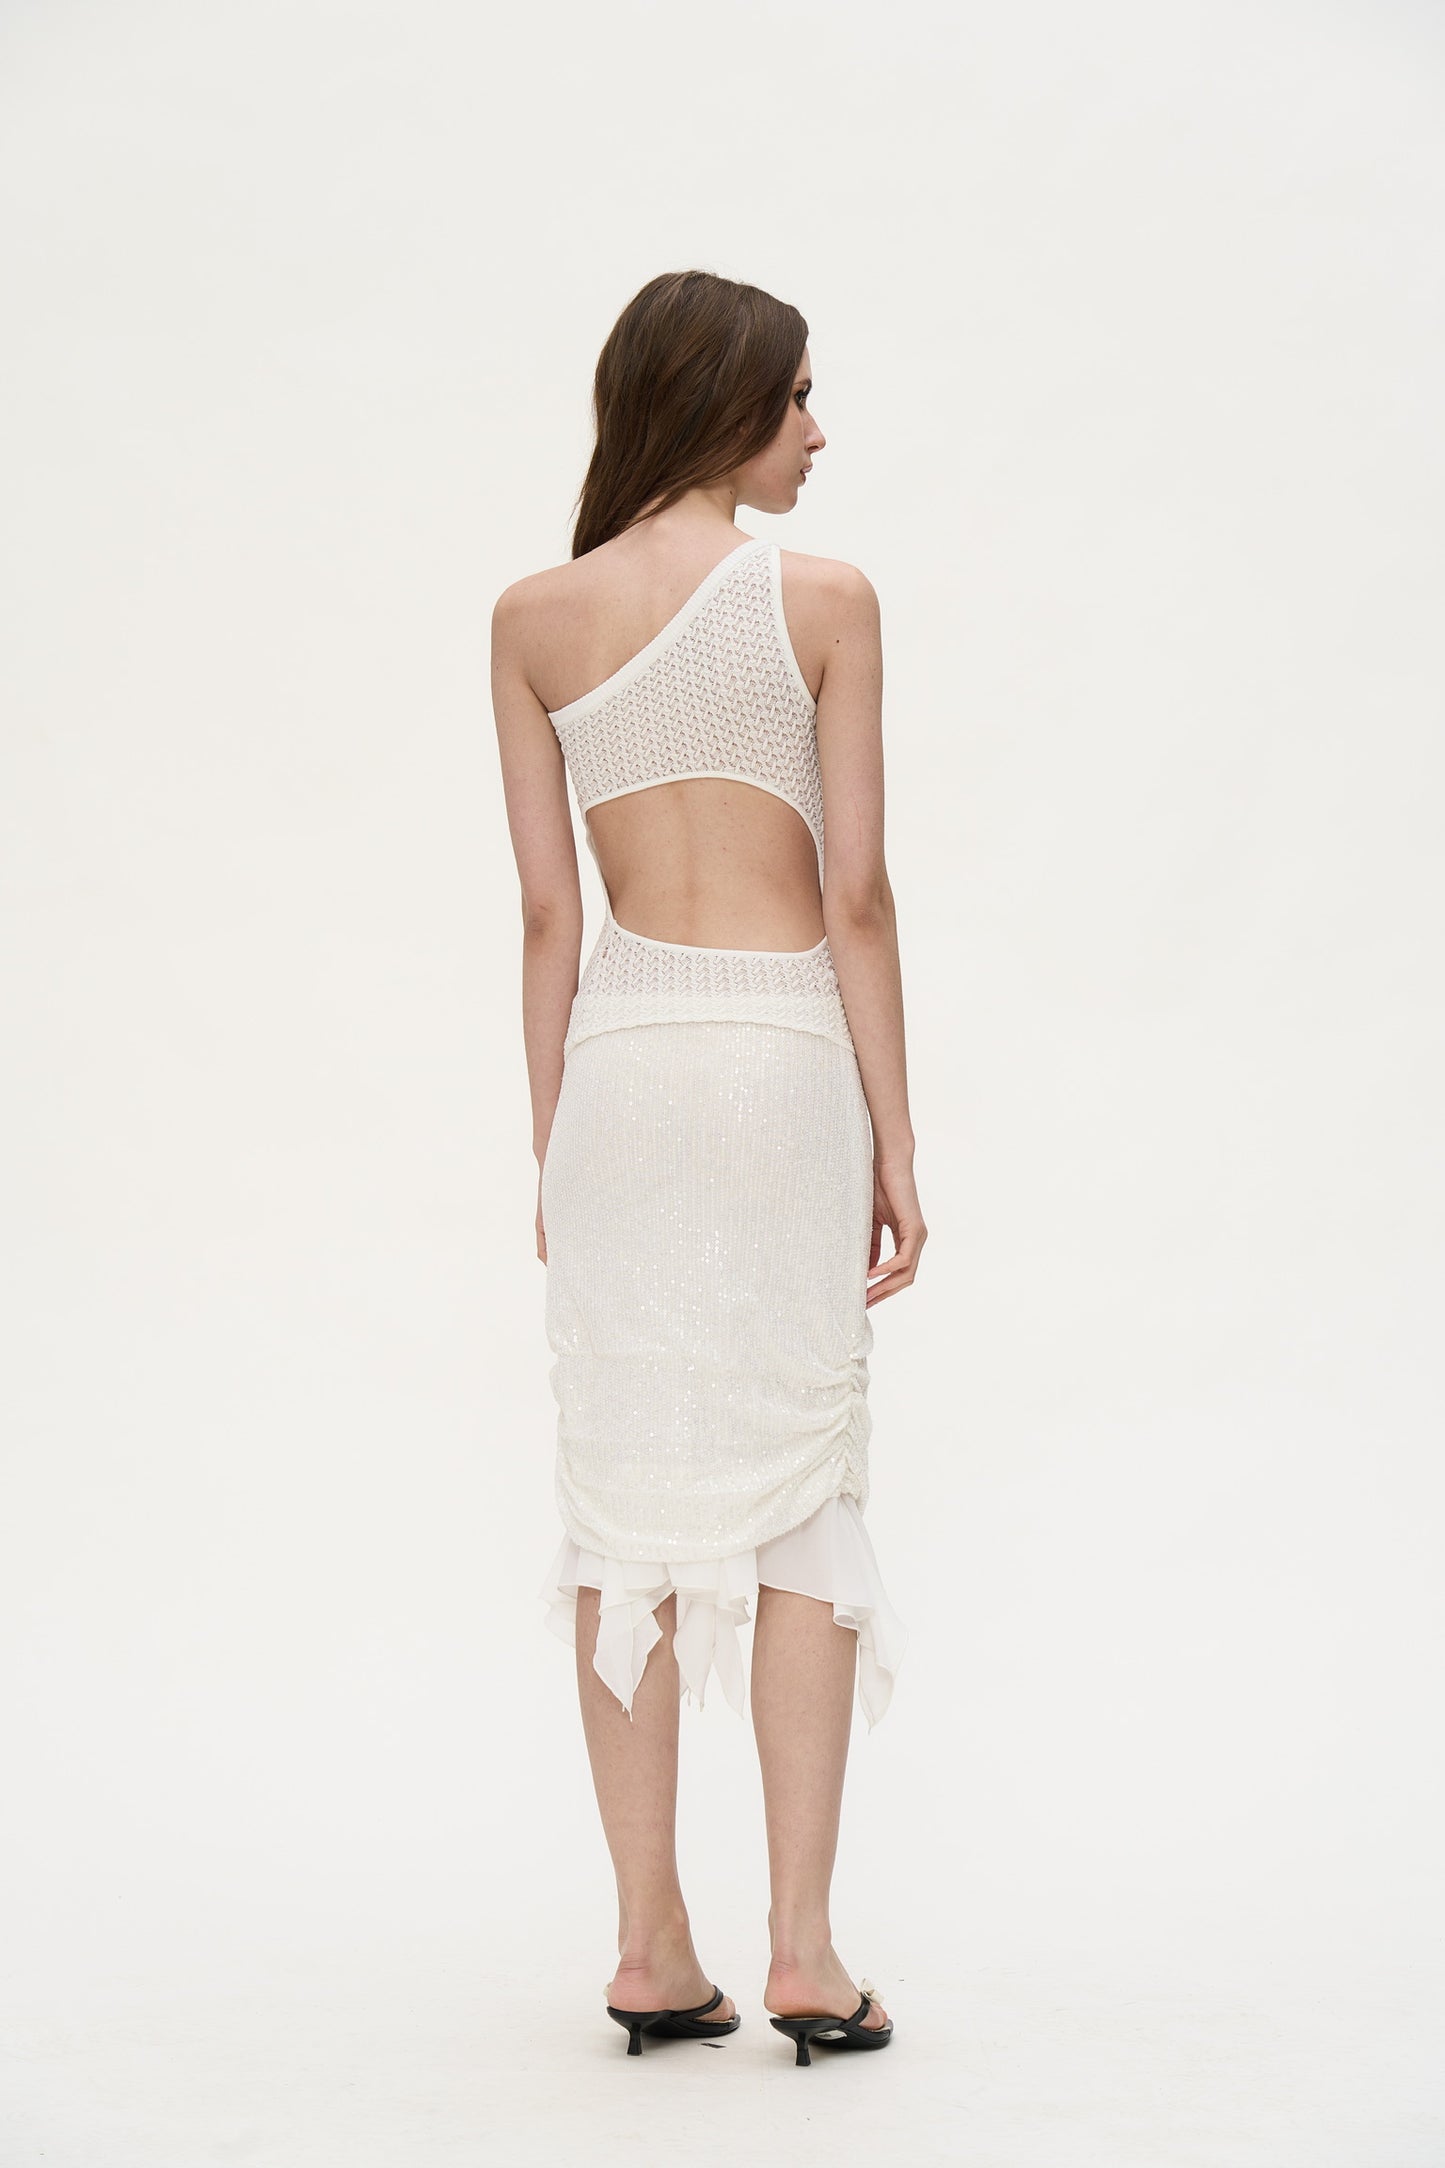 Sella Patchwork Sequin Skirt in White